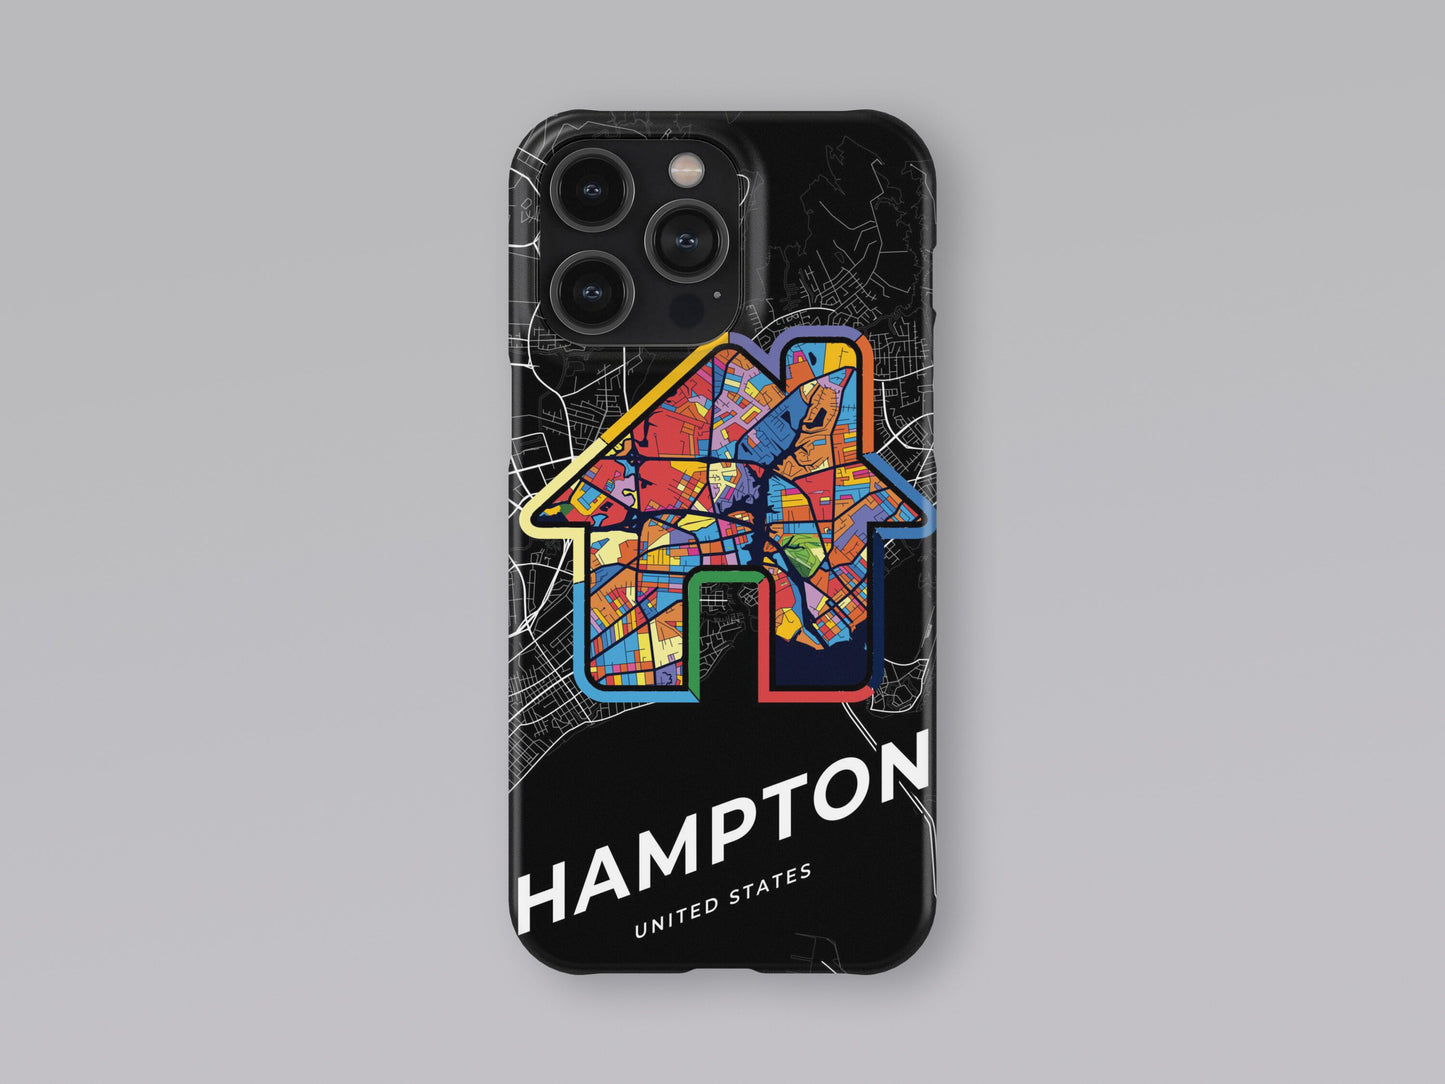 Hampton Virginia slim phone case with colorful icon. Birthday, wedding or housewarming gift. Couple match cases. 3